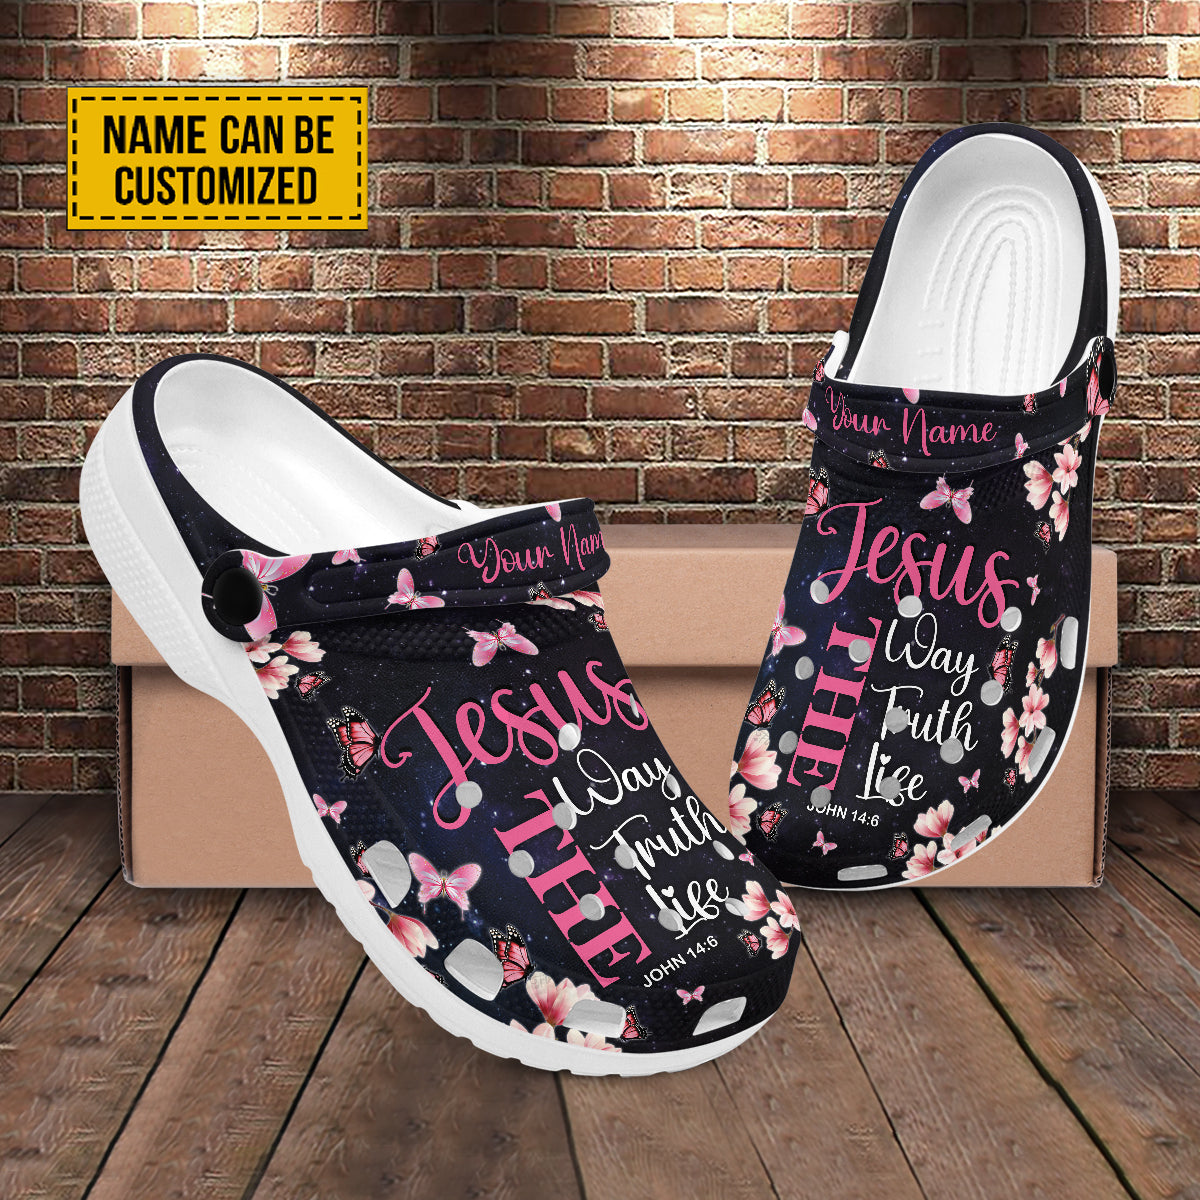 Teesdily | Jesus The Way The Truth The Life Customized Clogs Shoes, Gift For Jesus Lovers, God Faith Believers, Christian Gifts, Kid & Adult Unisex Clogs Shoes Eva